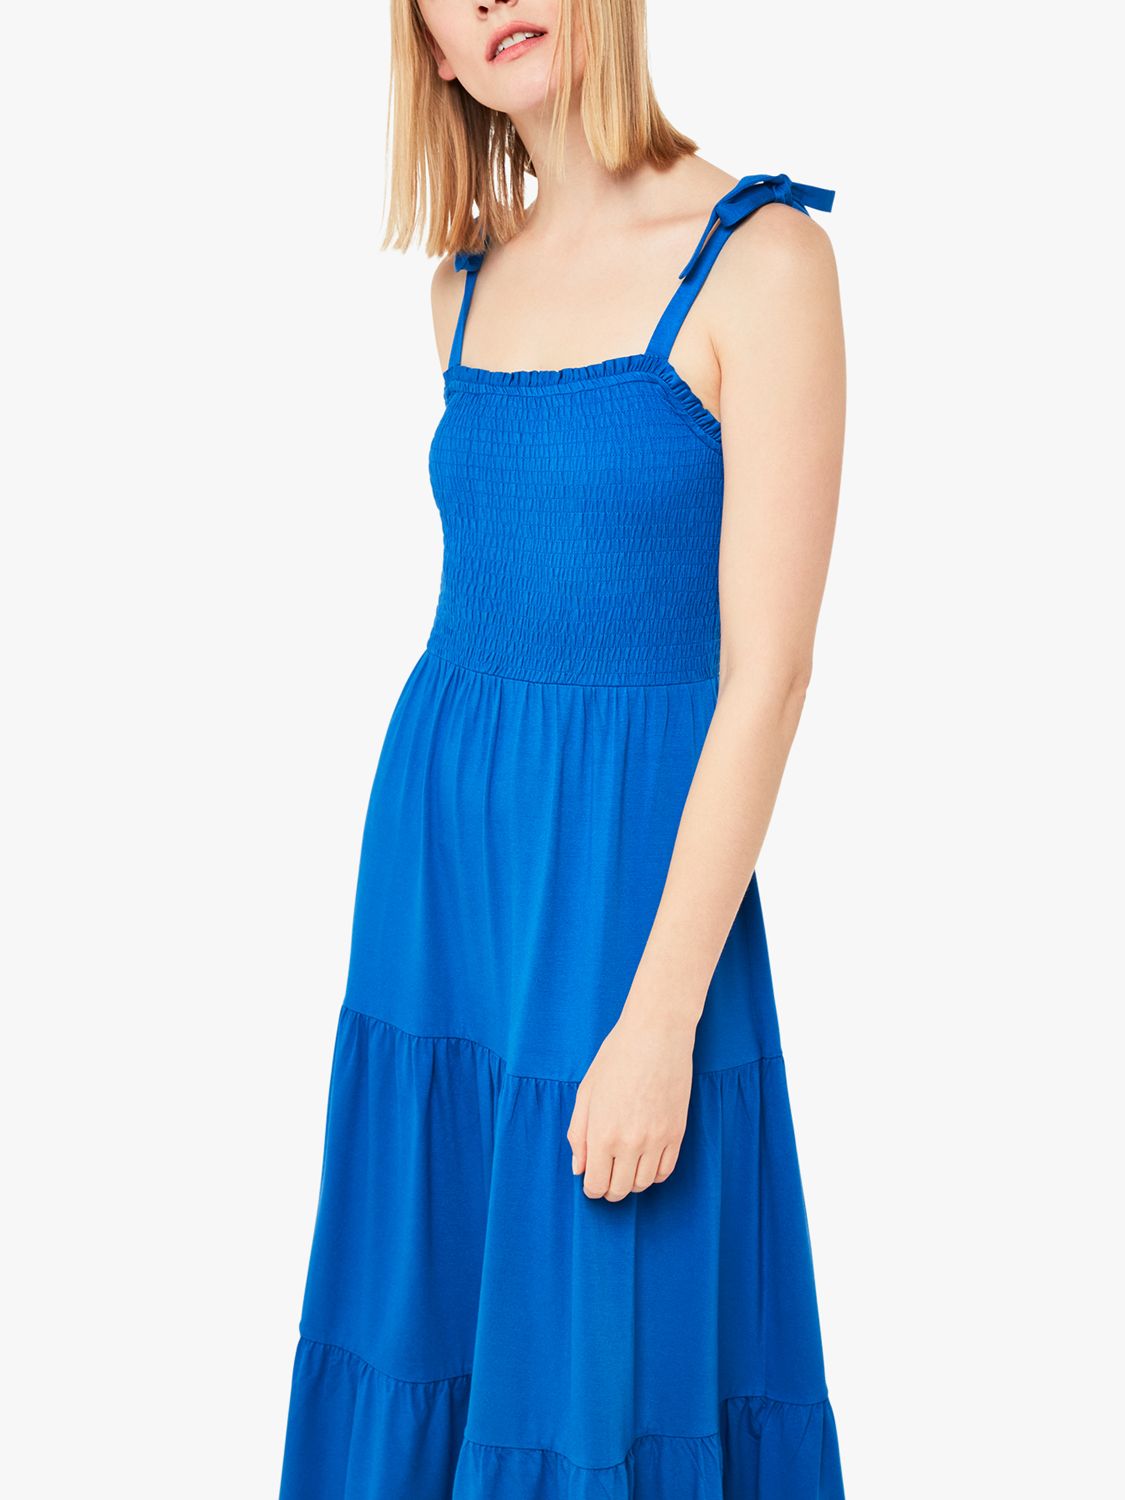 Whistles Smocked Tiered Jersey Dress, Blue, 18